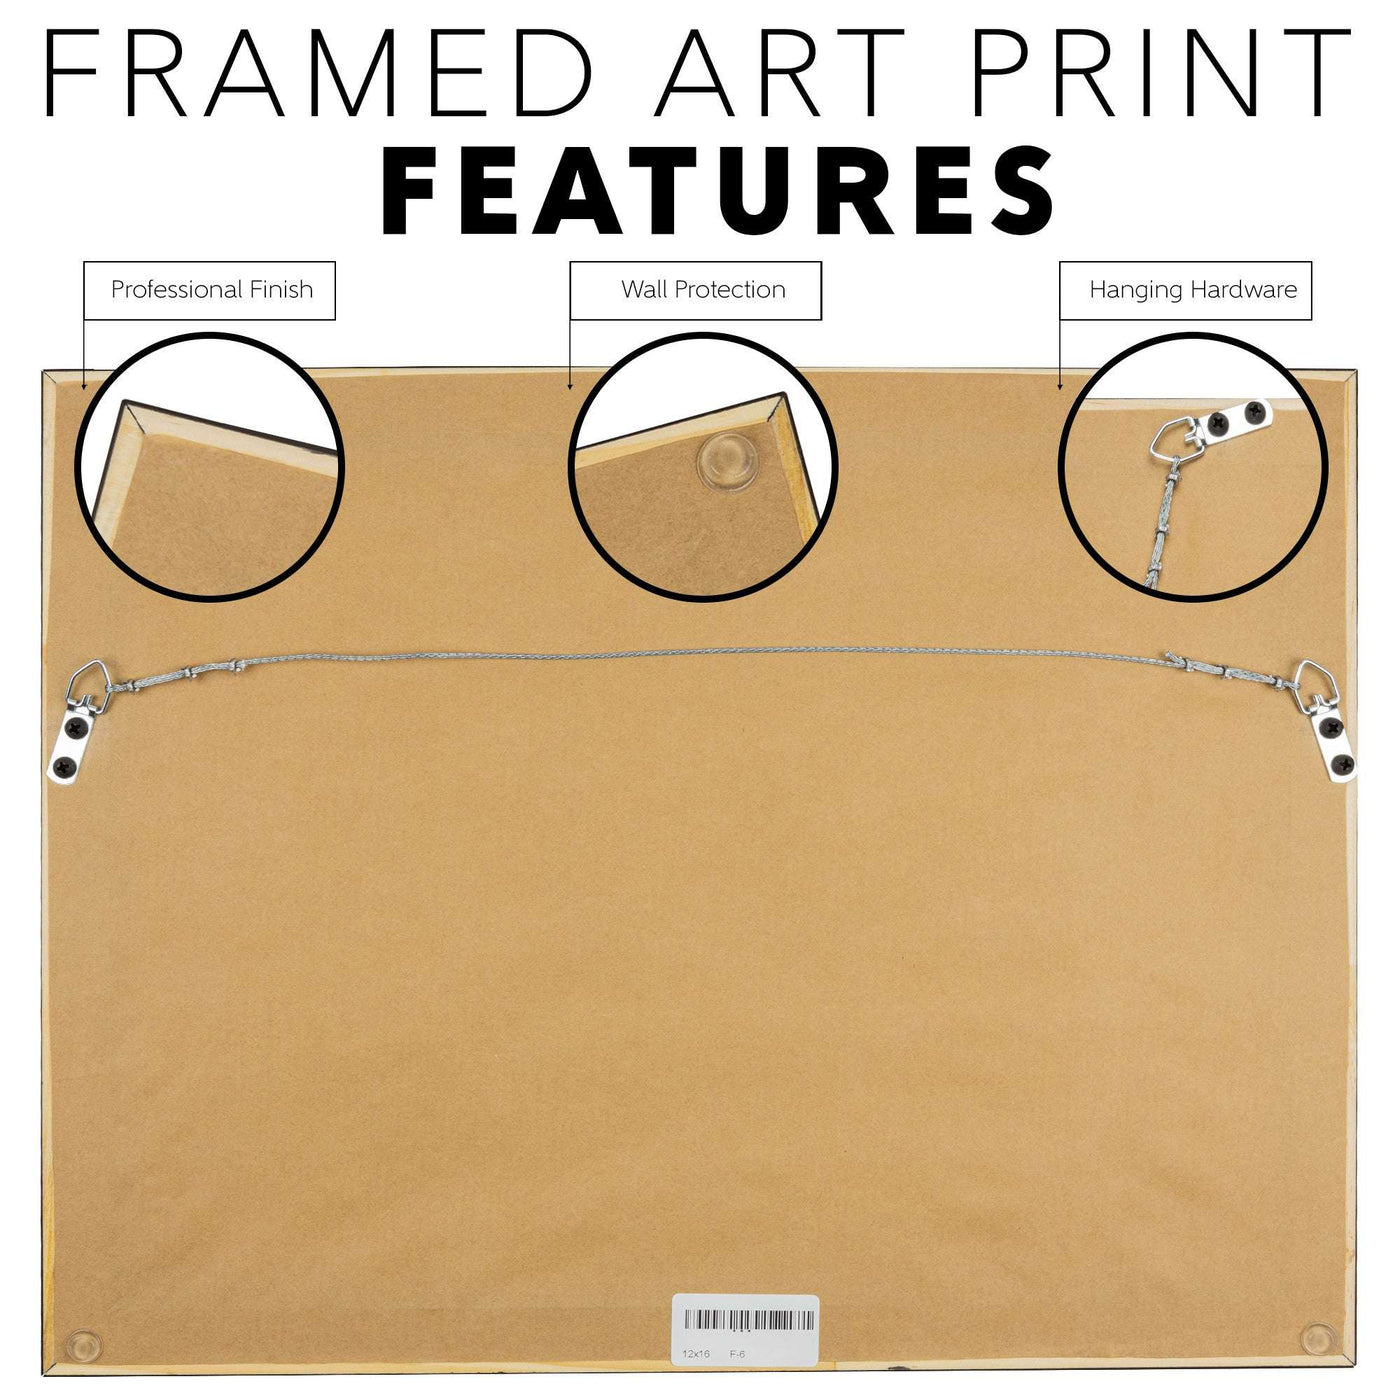 Back of a Framed Ferret Print highlighting its features: professional finish, wall protection, and hanging hardware with close-up insets.